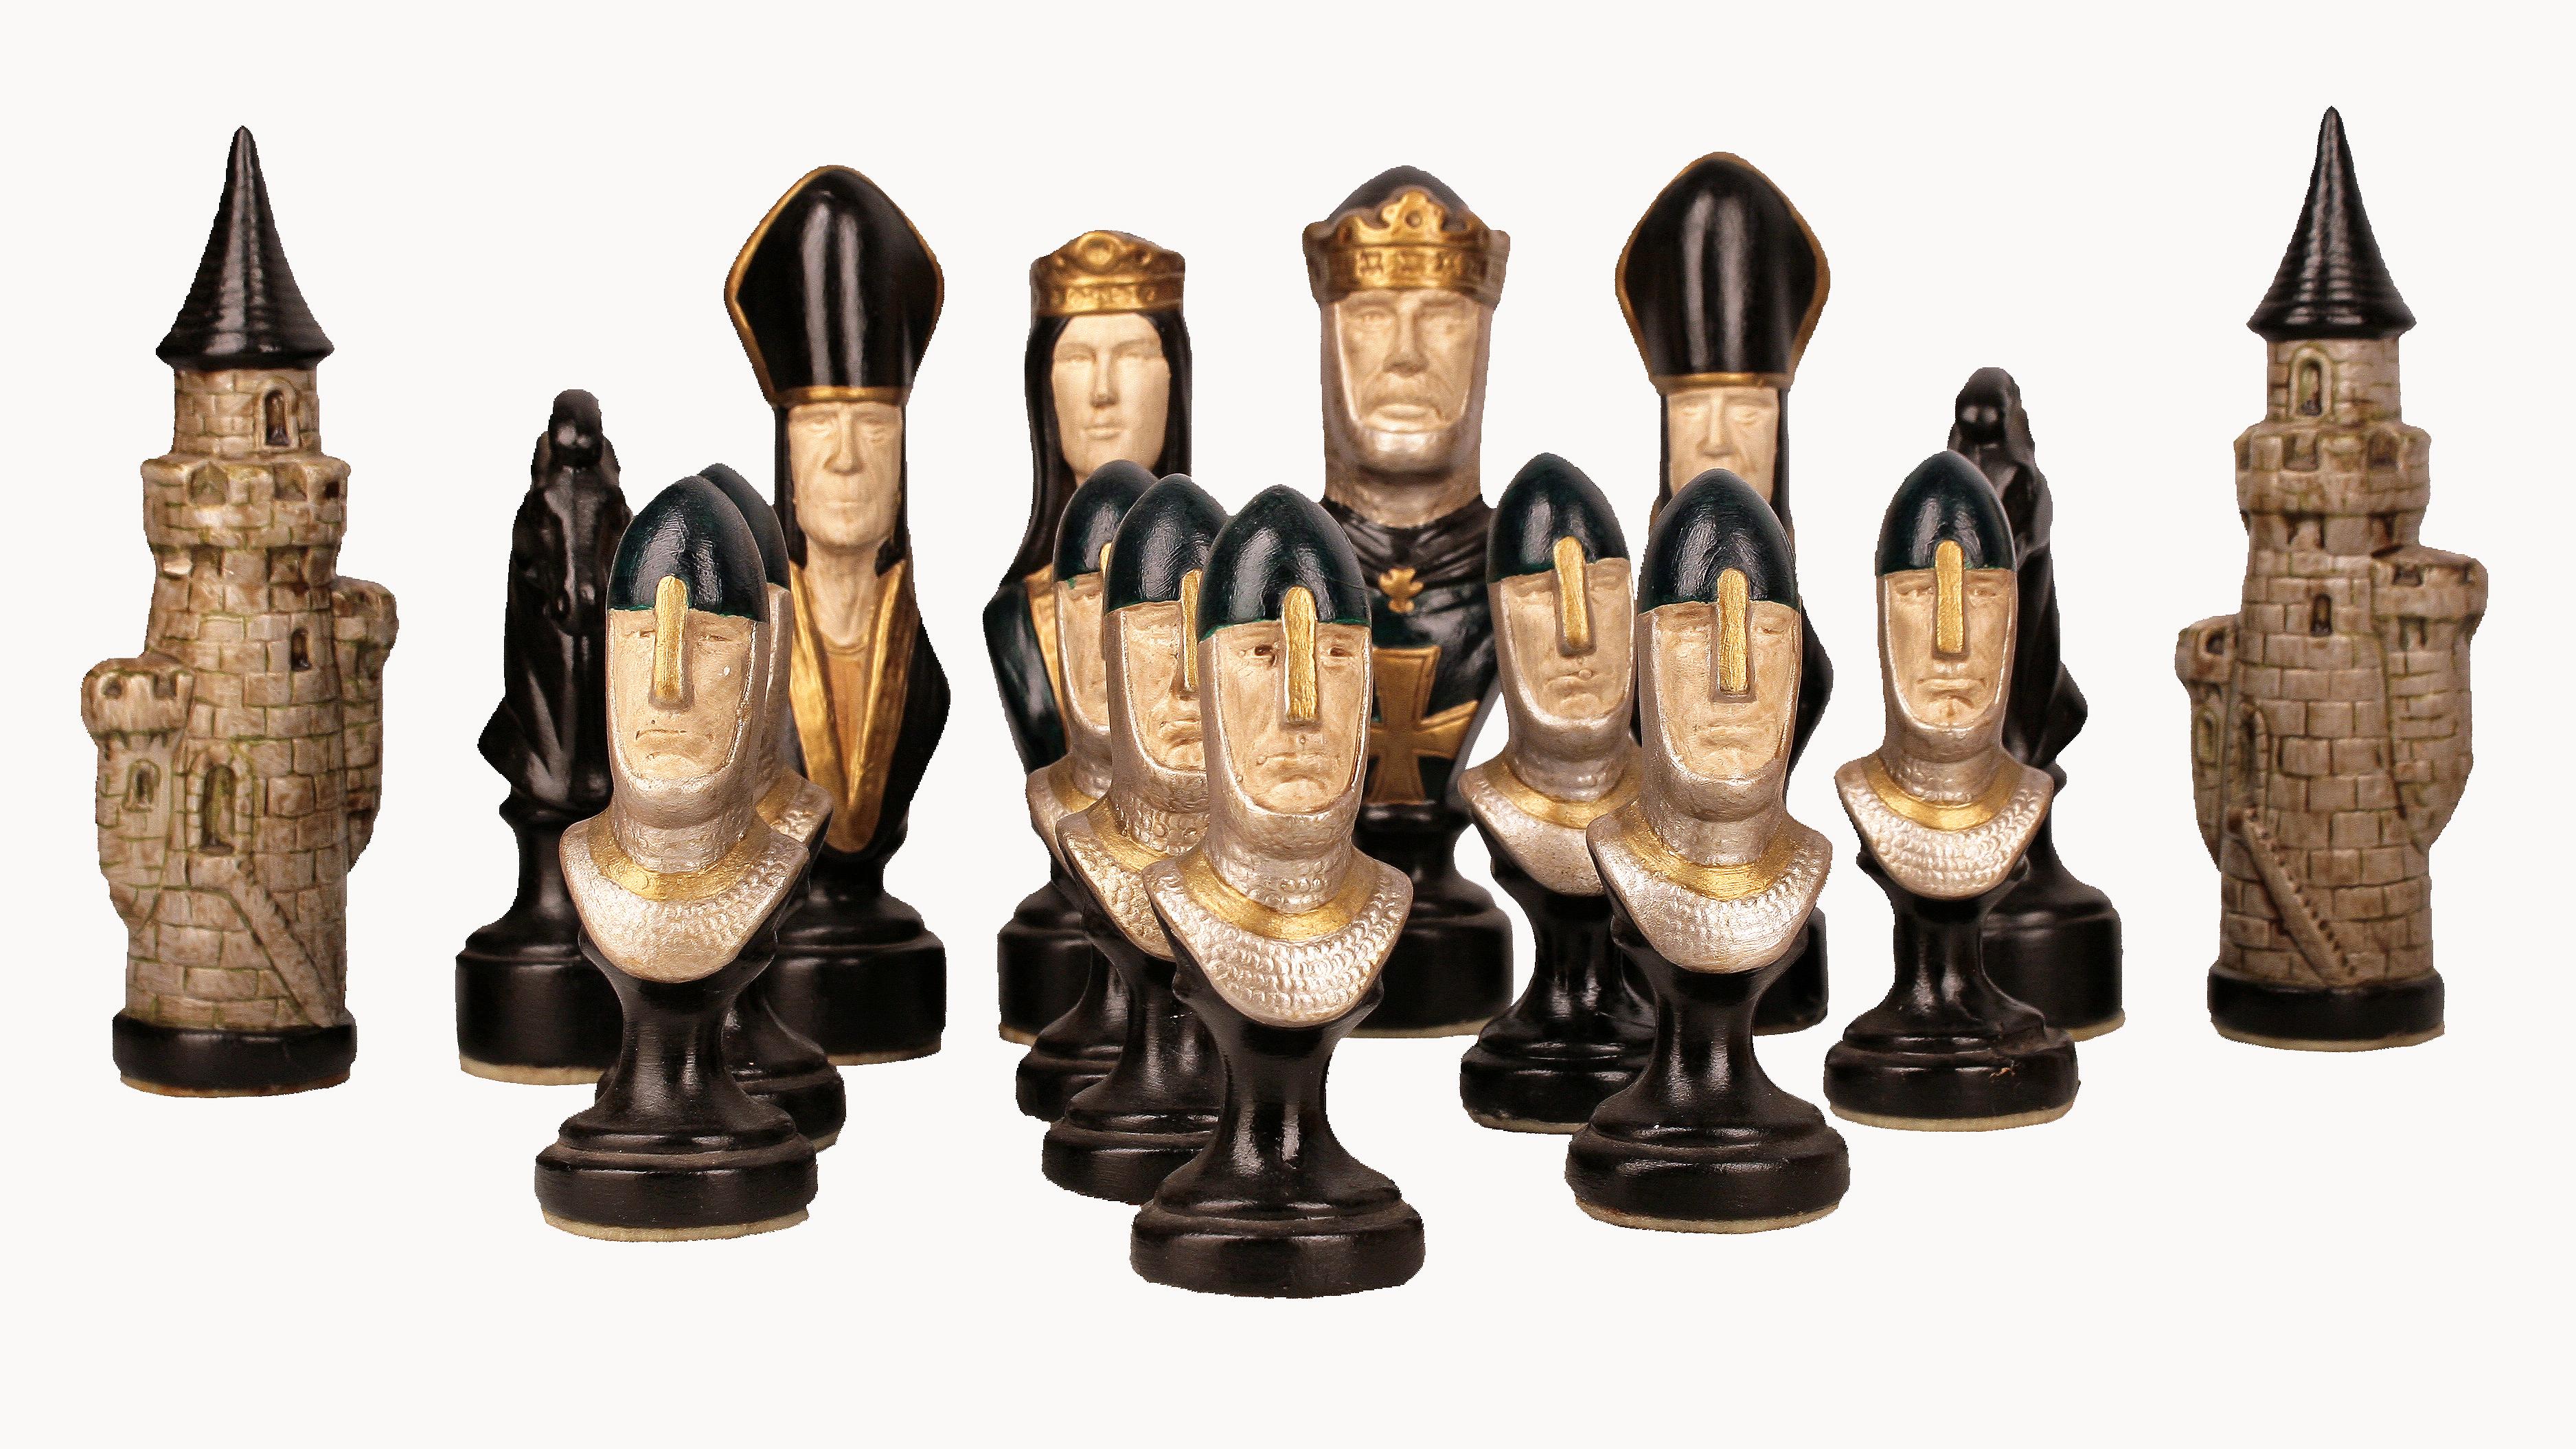 Enameled Mid-20th Century English Camelot/King Arthur Chess Set in Hand-Painted Ceramic For Sale